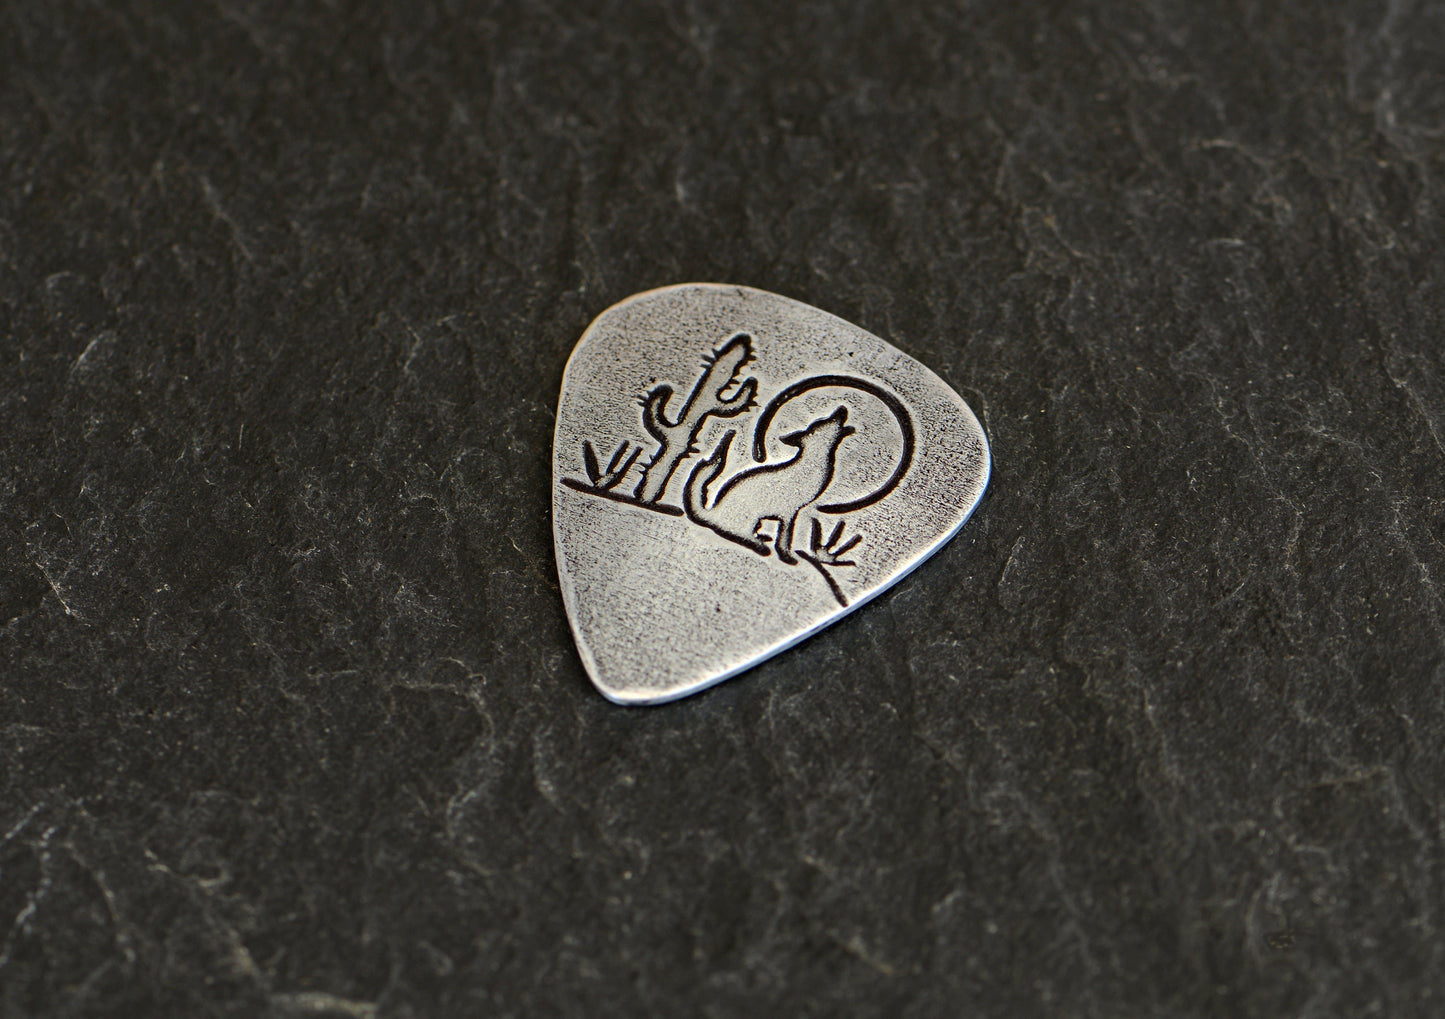 Desert theme sterling silver guitar pick with moon, howling wolf and cactus